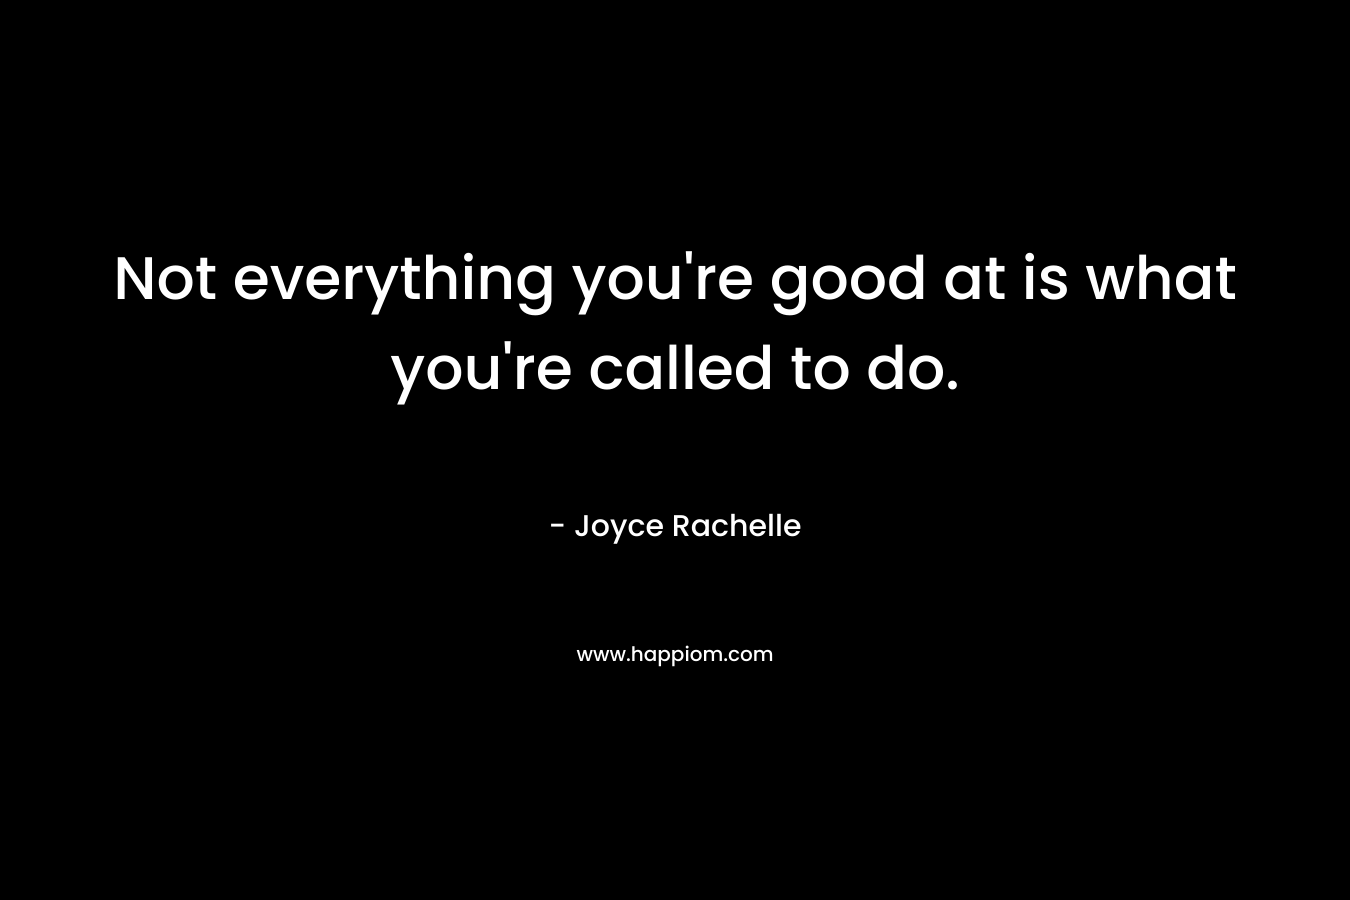 Not everything you're good at is what you're called to do.